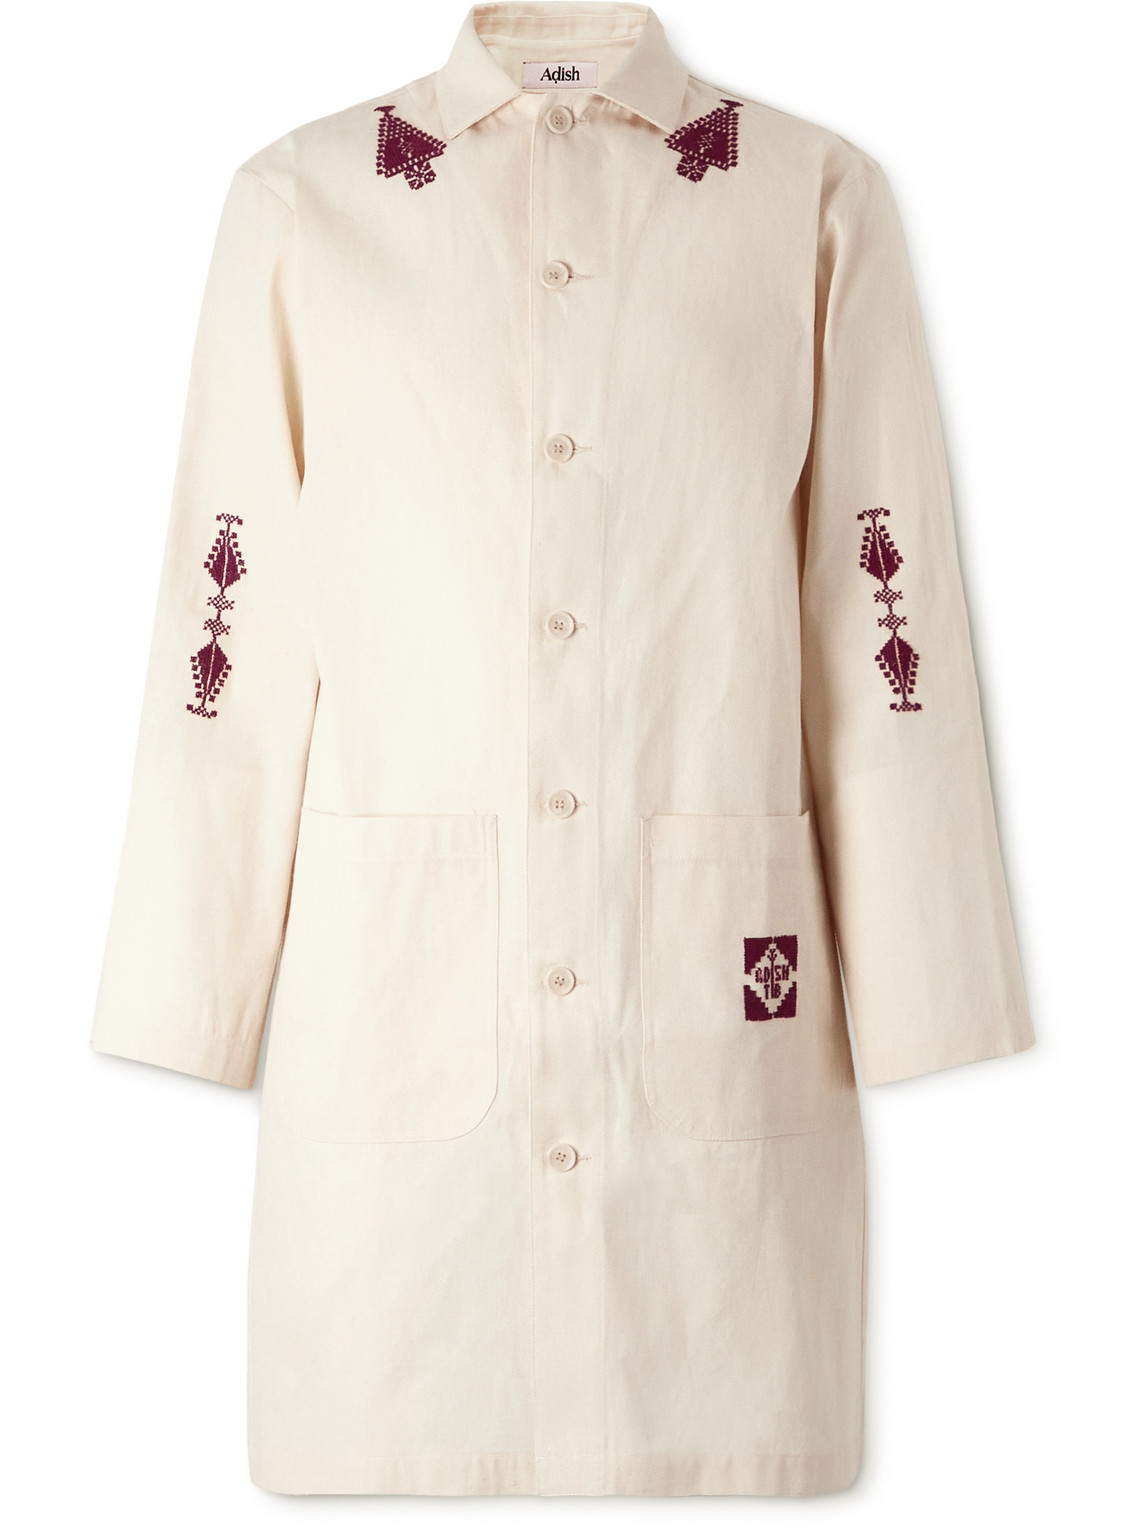 The Inoue Brothers Makhlut Embroidered Cotton-Canvas Coat